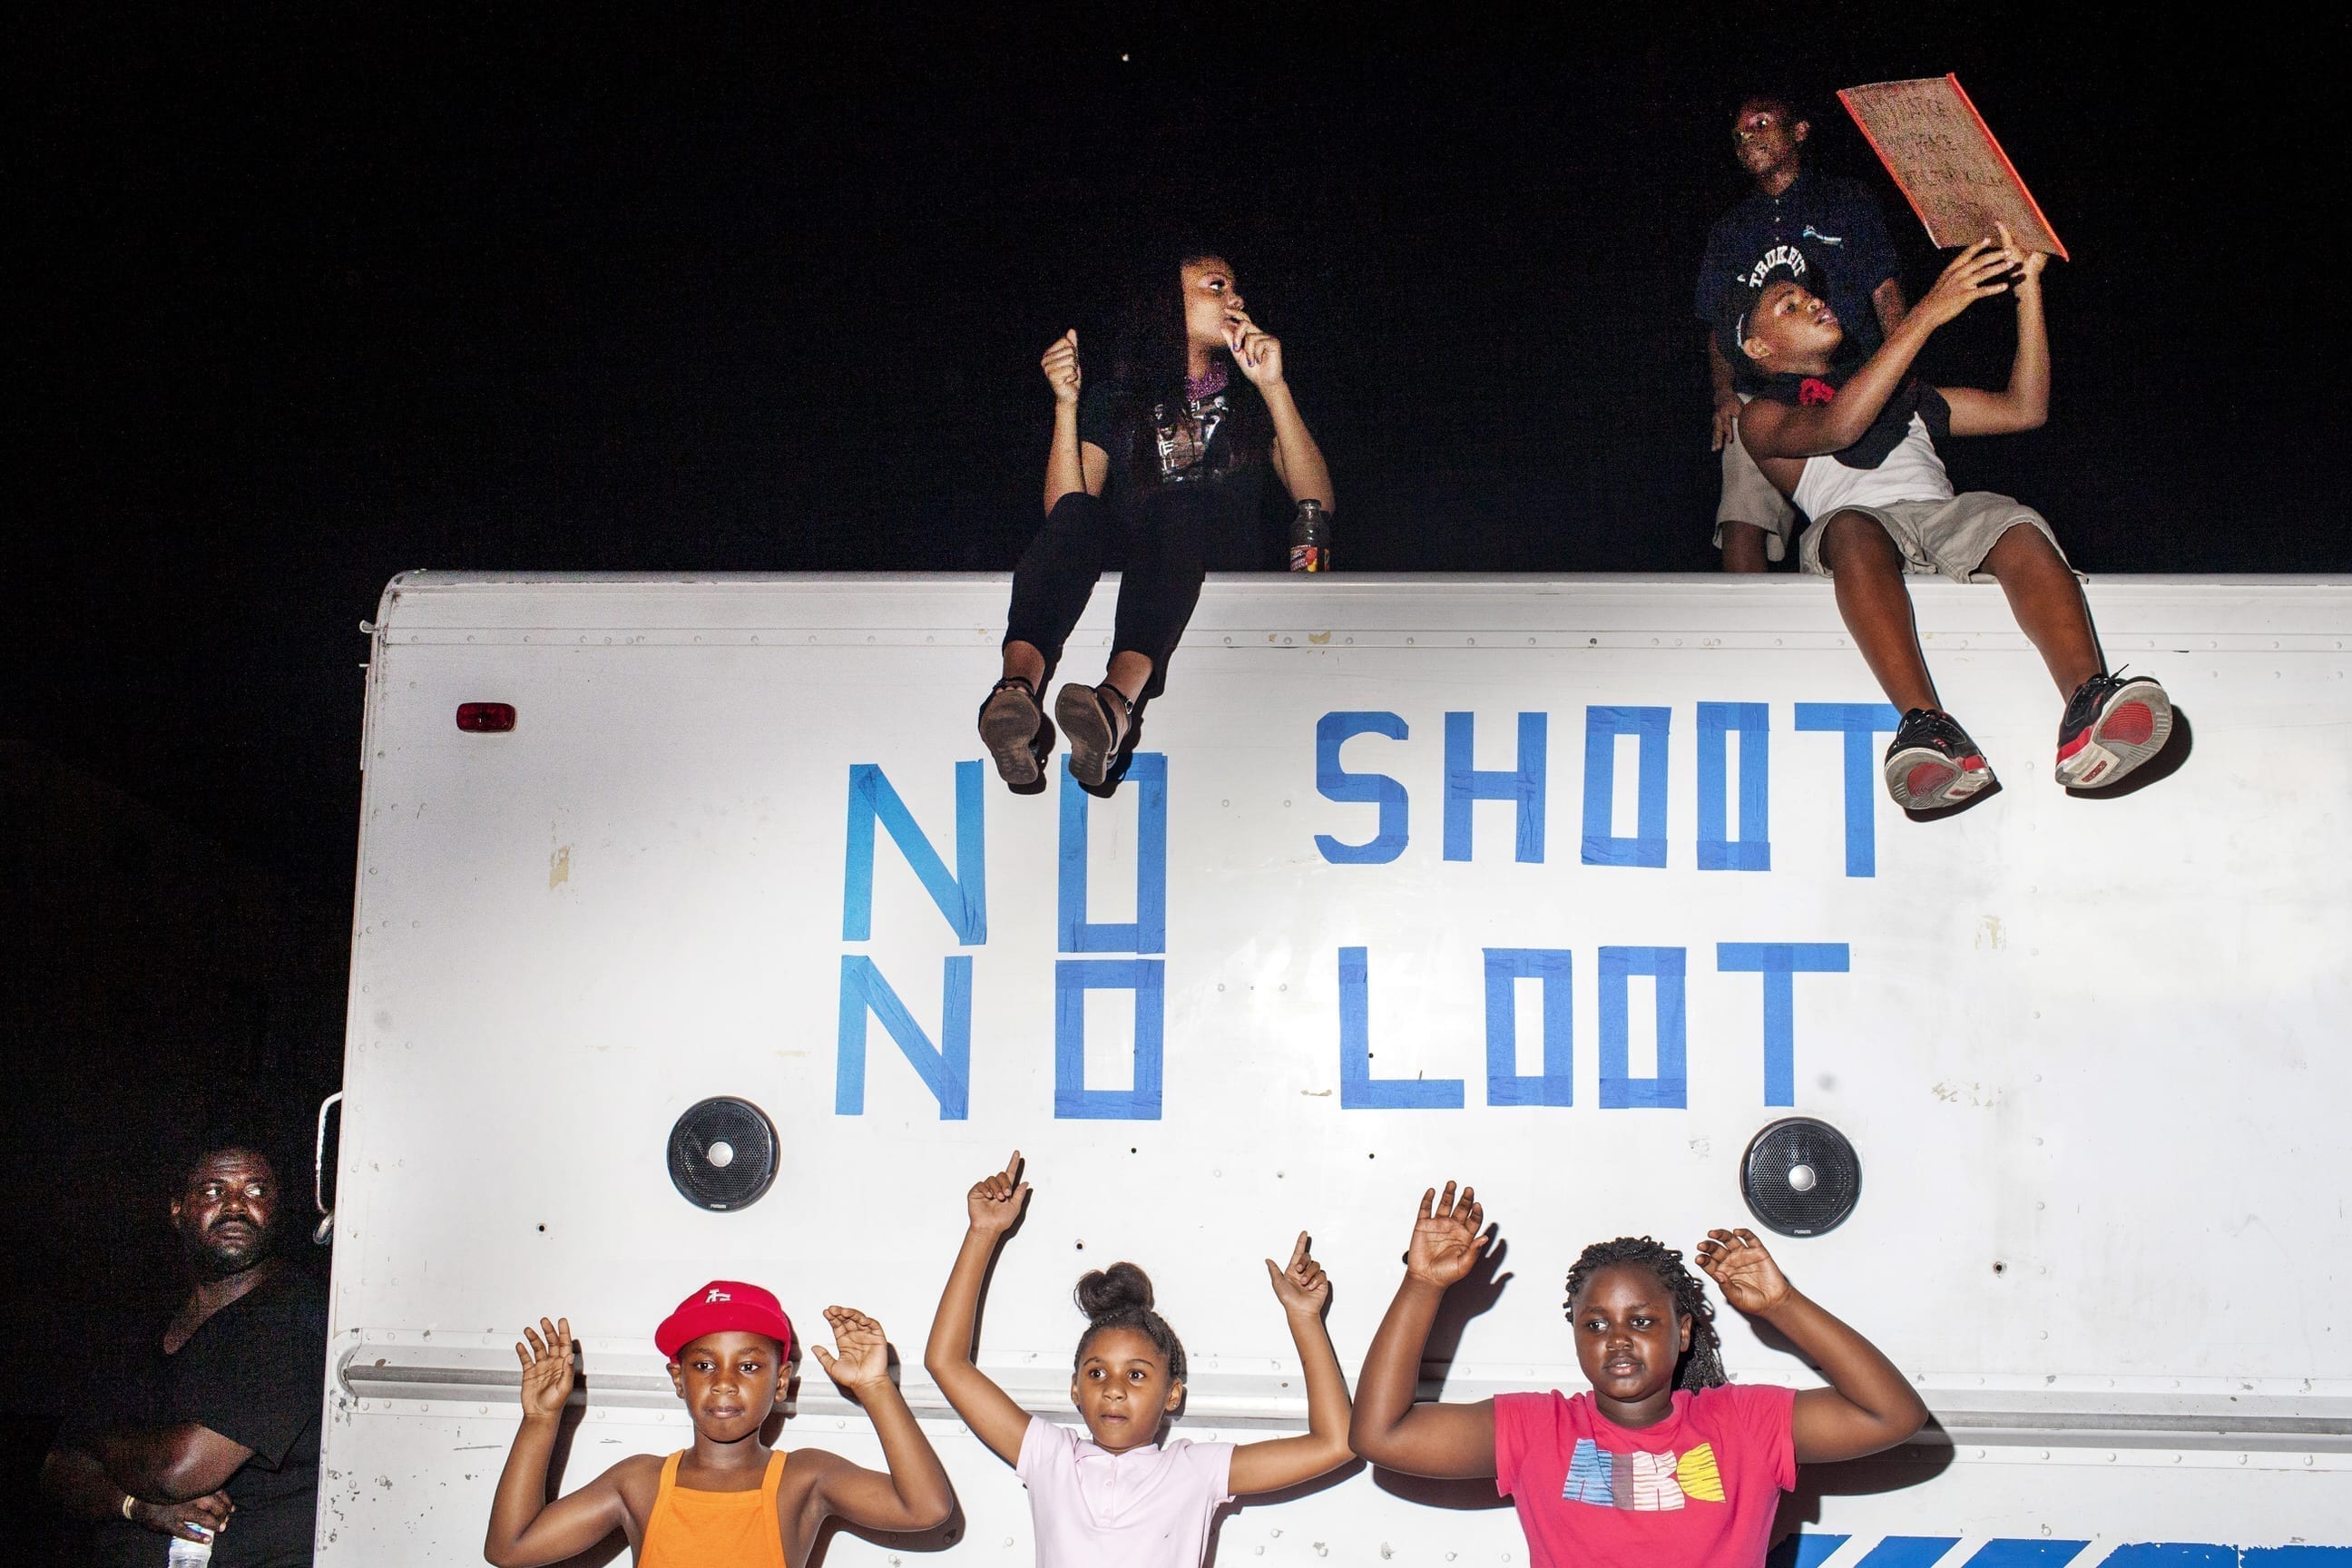 19th August, 2014. Ferguson, MO. Children dance to music playing from a truck with the words "no shoot, no loot" written on it and parked in a lot on West Florissant Ave. during a protest on 19th August 2014, in Ferguson. Moments later riot police insisted that the protesters keep marching in circles around the designated protest area and not stop to dance.